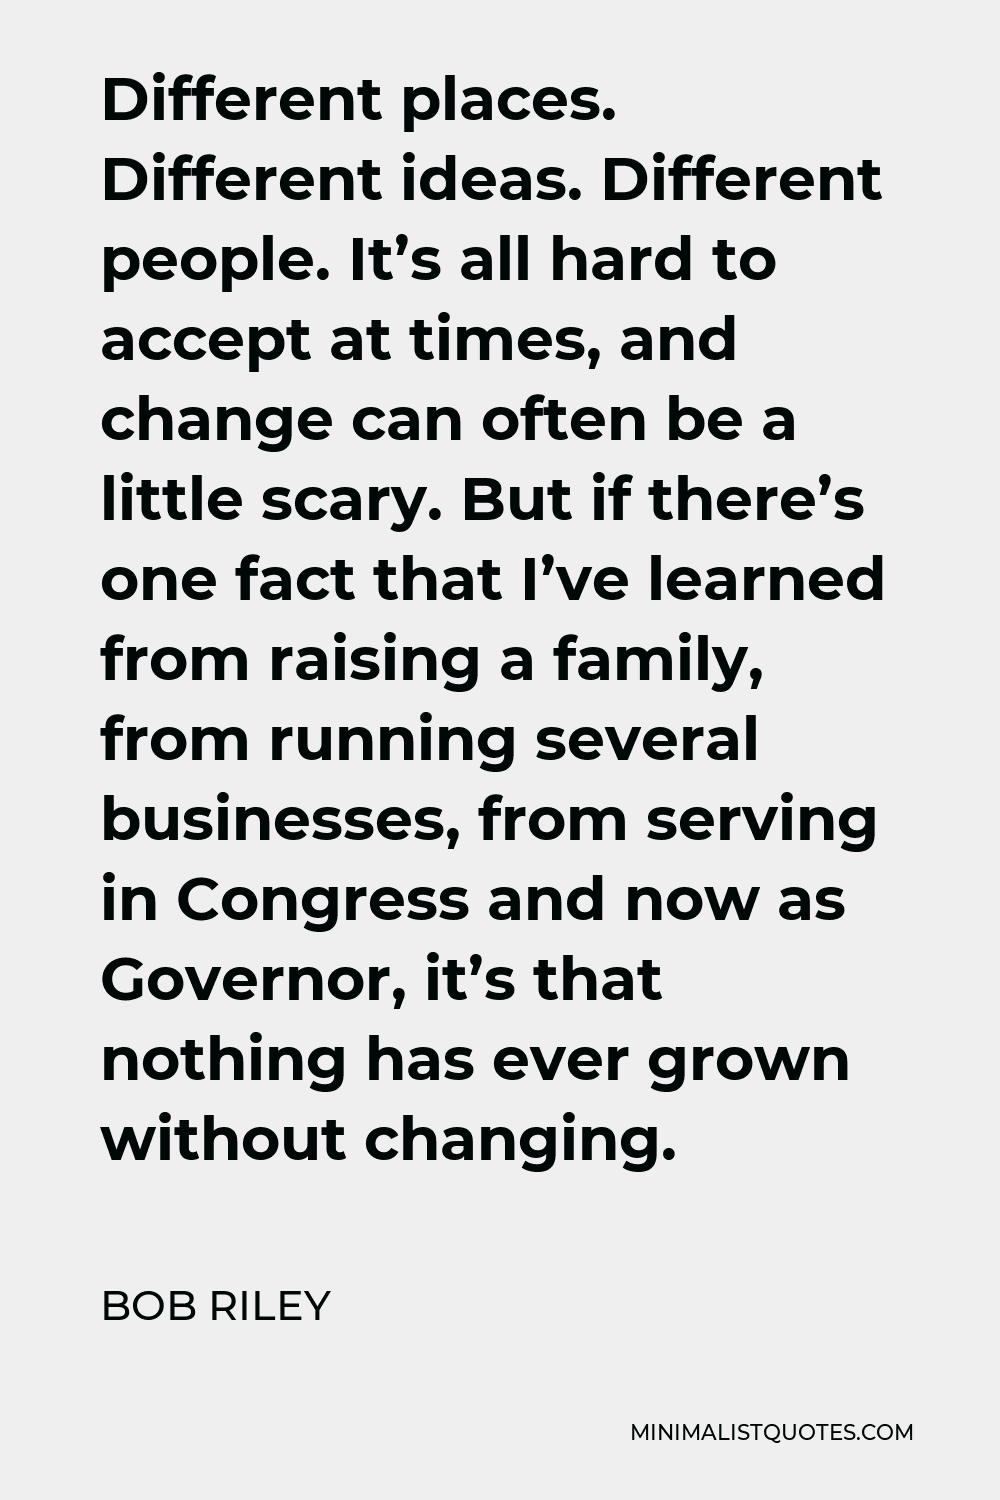 Bob Riley Quote - Different places. Different ideas. Different people. It’s all hard to accept at times, and change can often be a little scary. But if there’s one fact that I’ve learned from raising a family, from running several businesses, from serving in Congress and now as Governor, it’s that nothing has ever grown without changing.